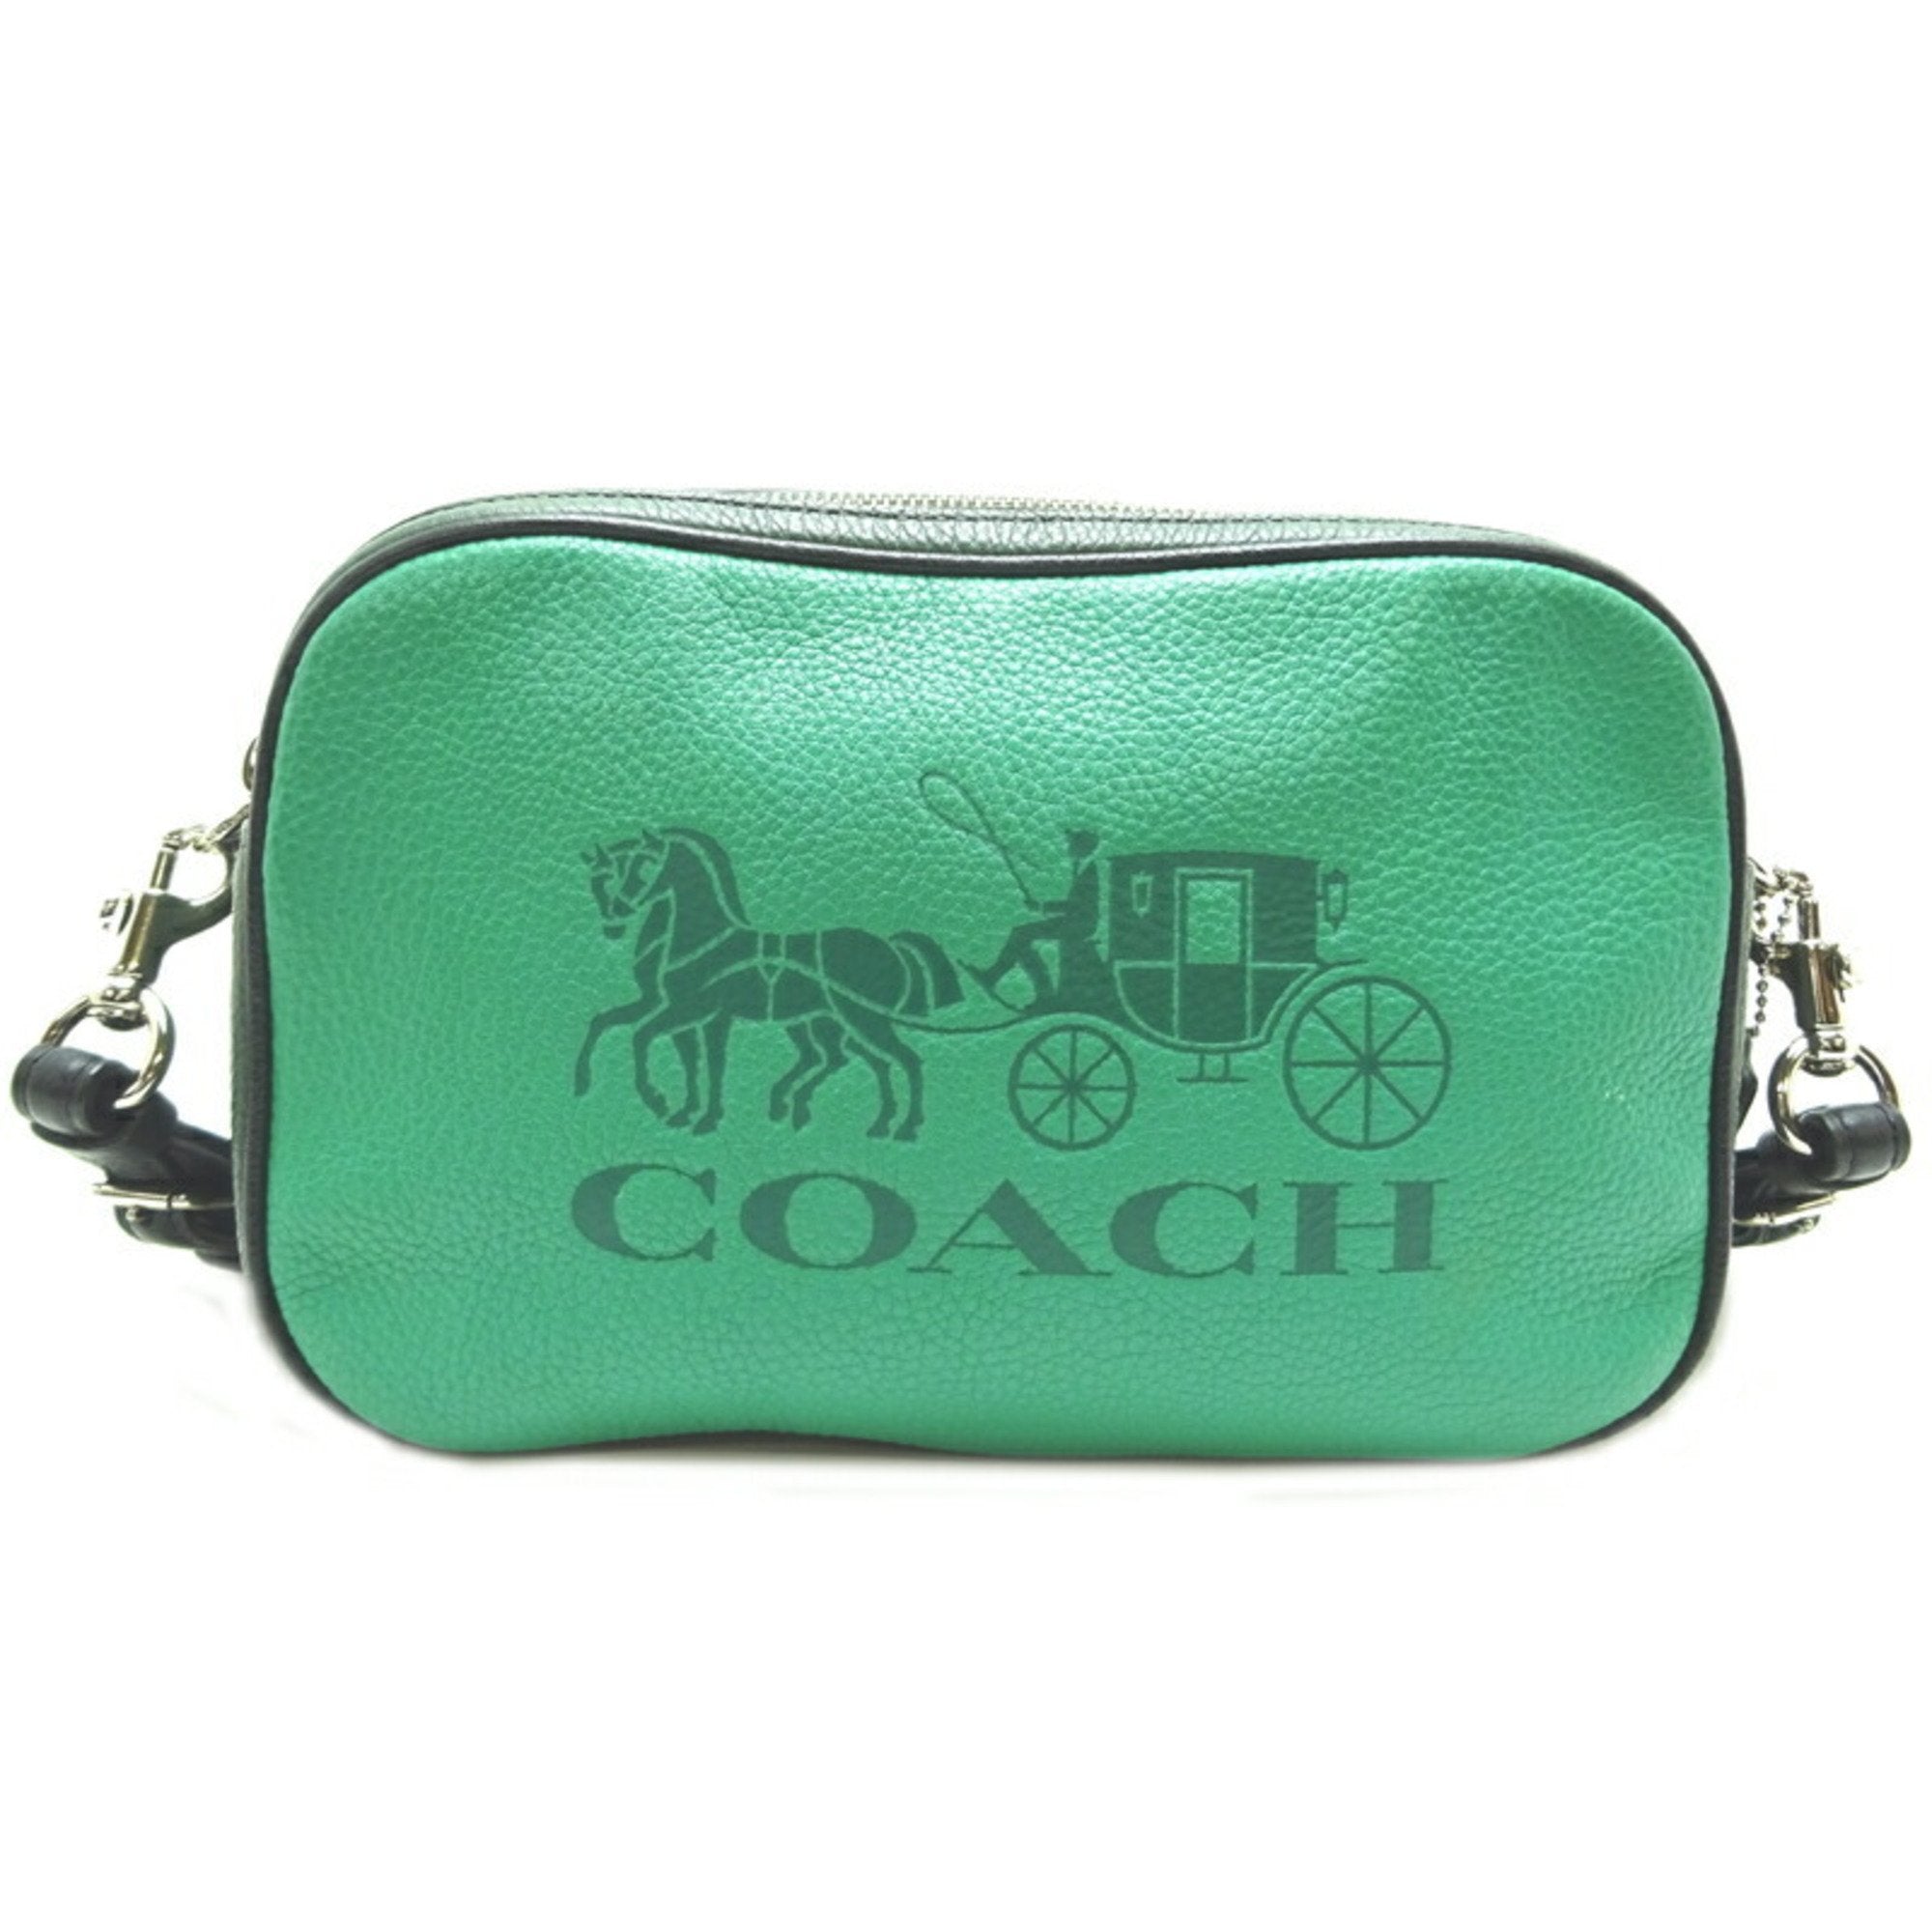 Coach Green Color Block Horse & Carriage Leather Saddle Bag